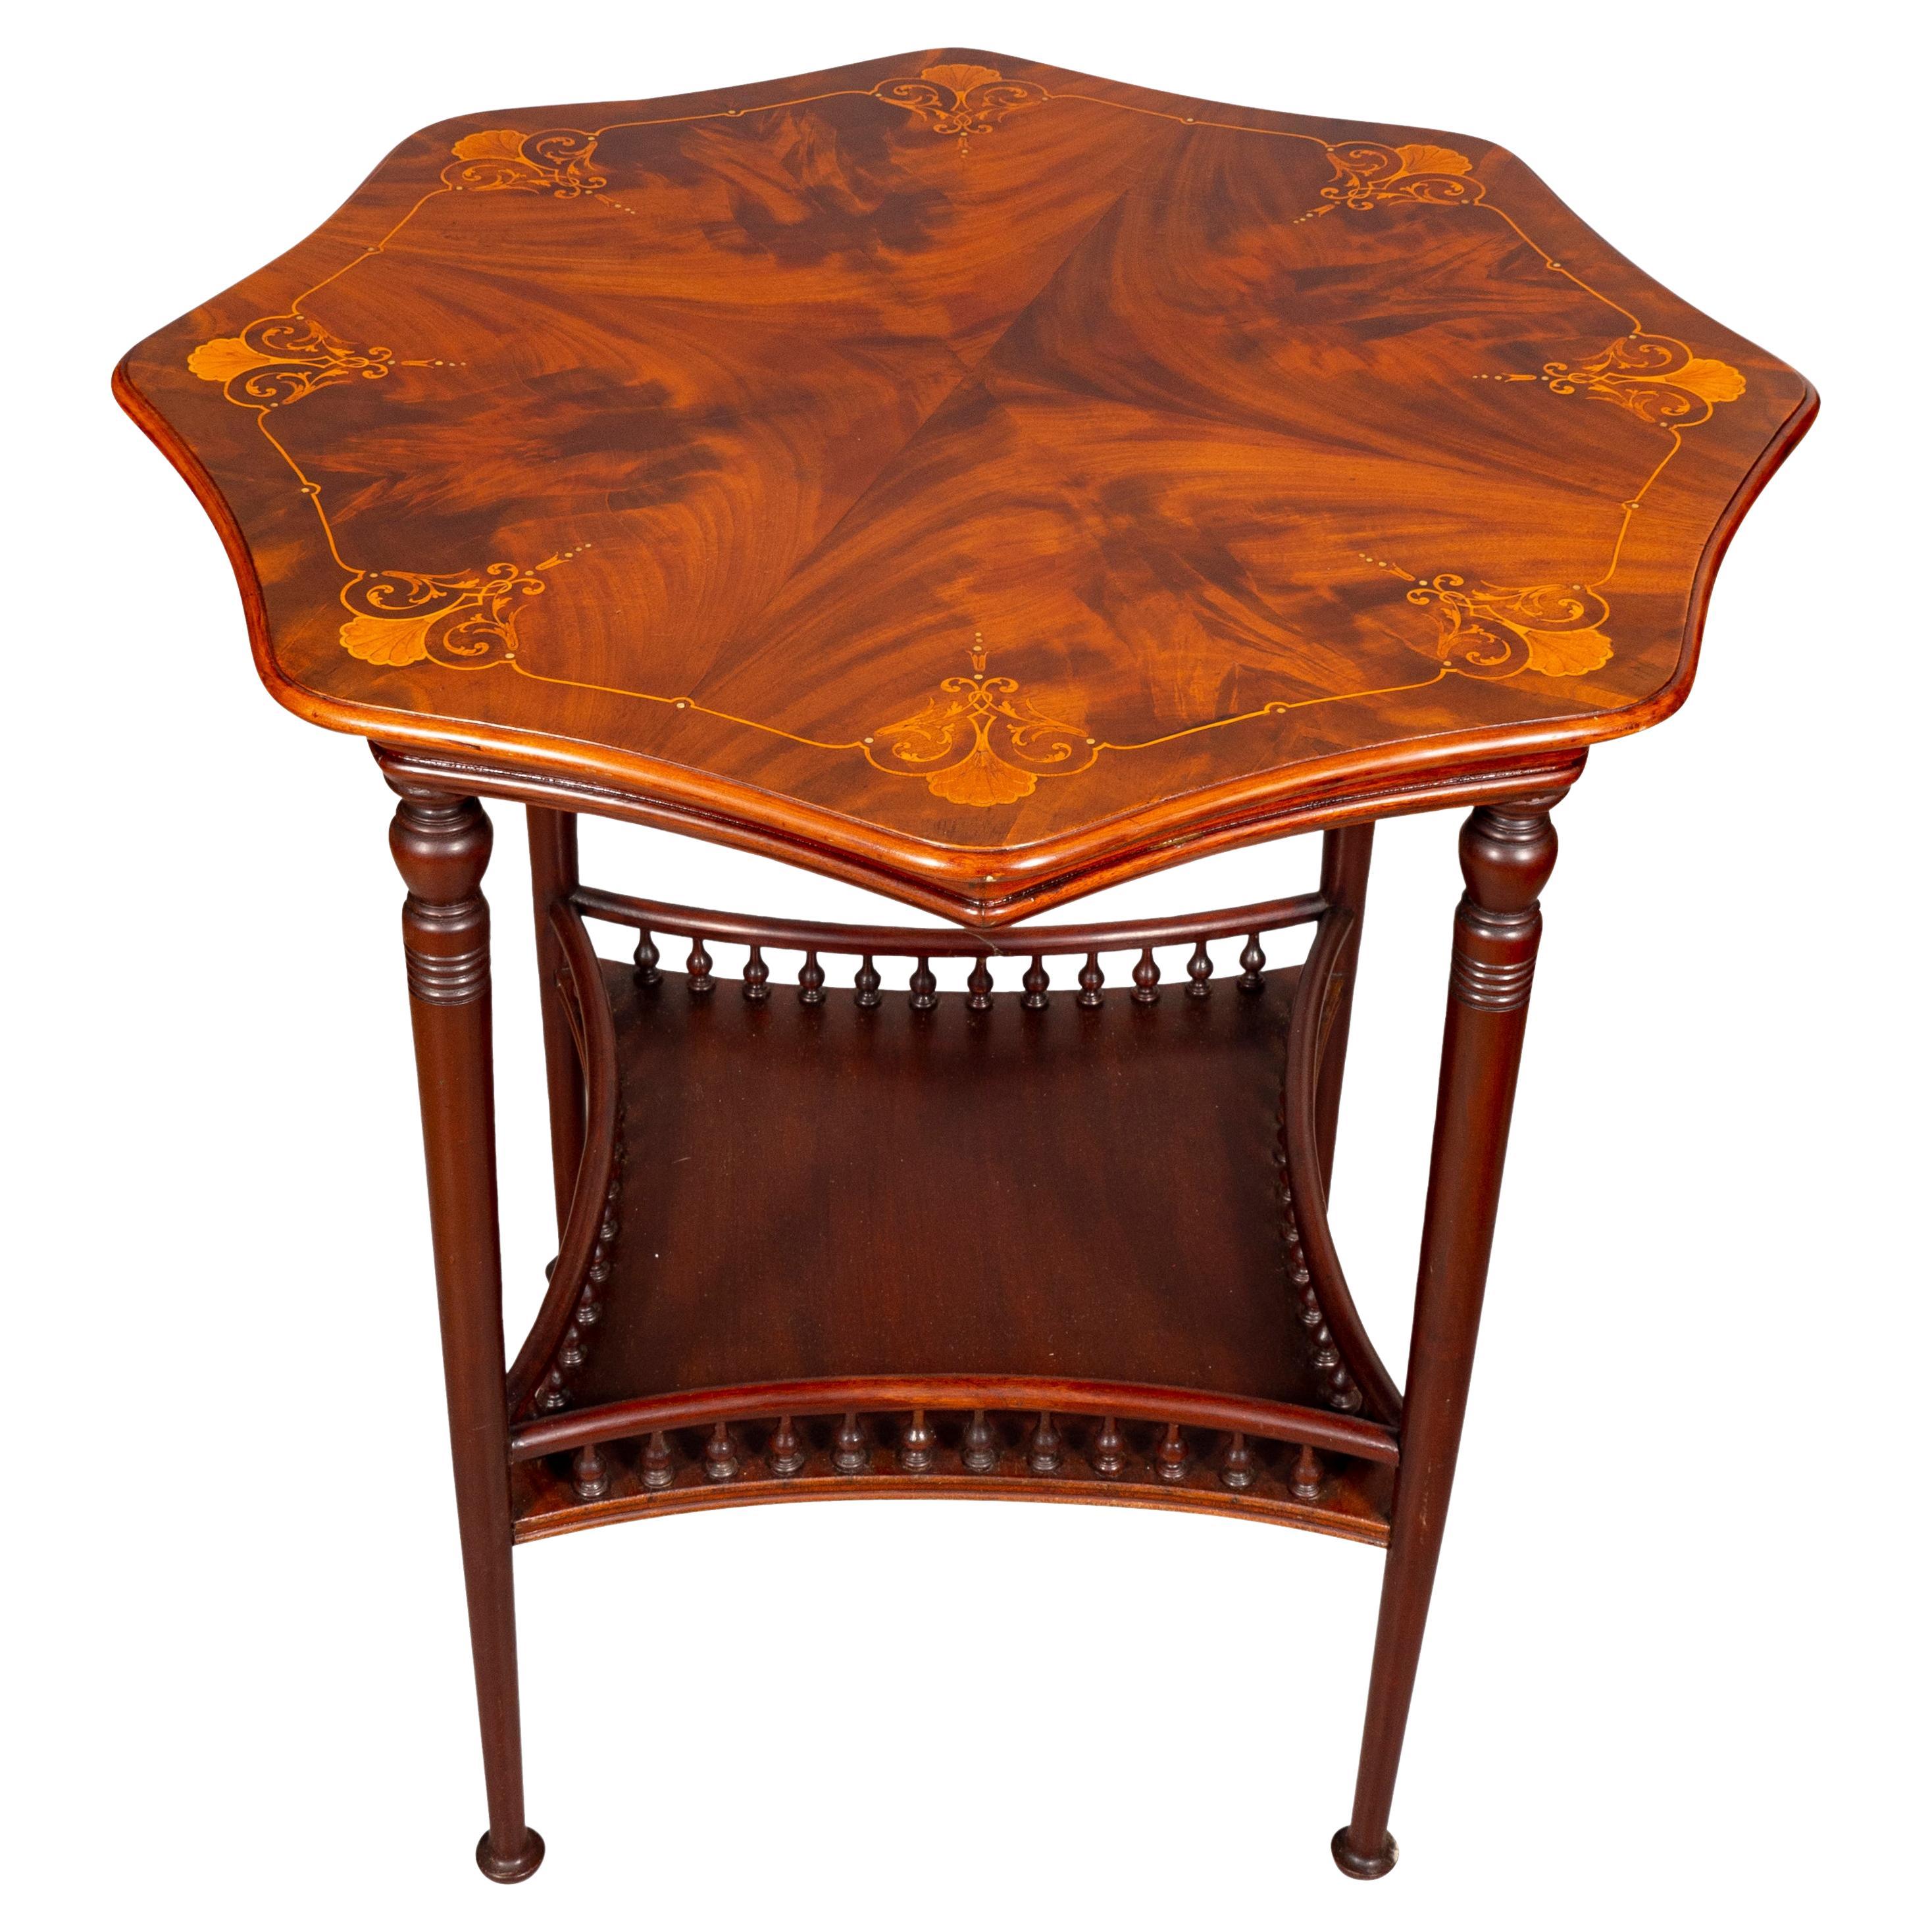 With a beautifully figured octagonal top inlaid with shell and volutes. With a conforming frieze raised on circular tapered legs joined by a lower shelf with spindle gallery. Ending on button feet.